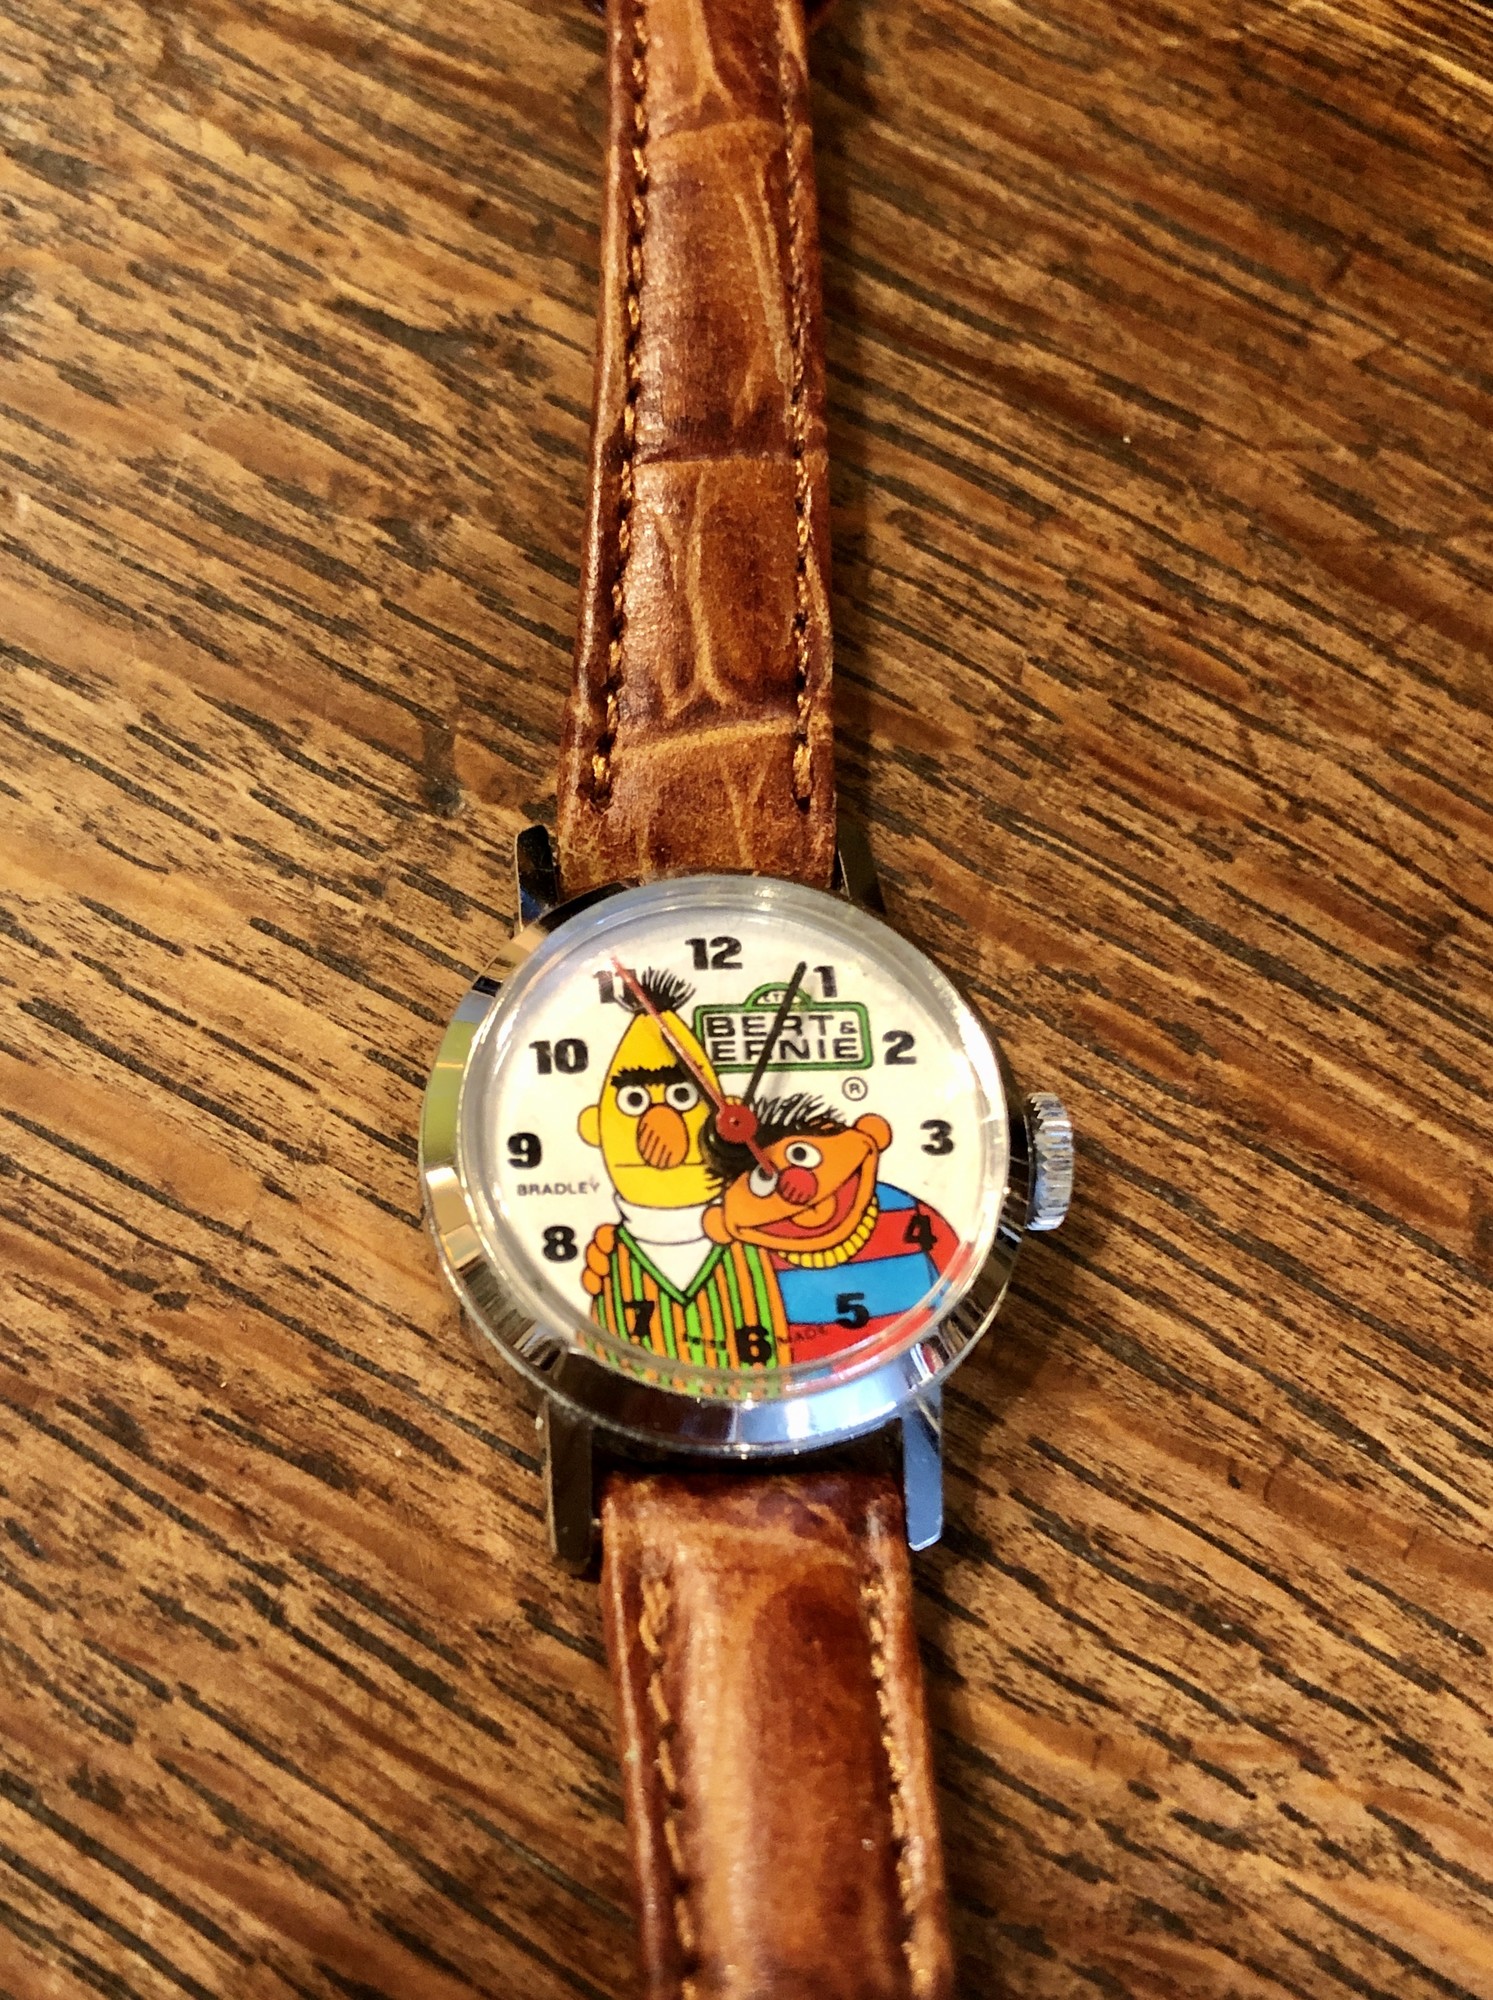 Vintage Bradley Bert & Ernie Swiss Movement Wind-up Watch C.1970s, Size: 25.3mm. Seems to be running well. In nice used condition.
Ships priority mail or can pick up in store.